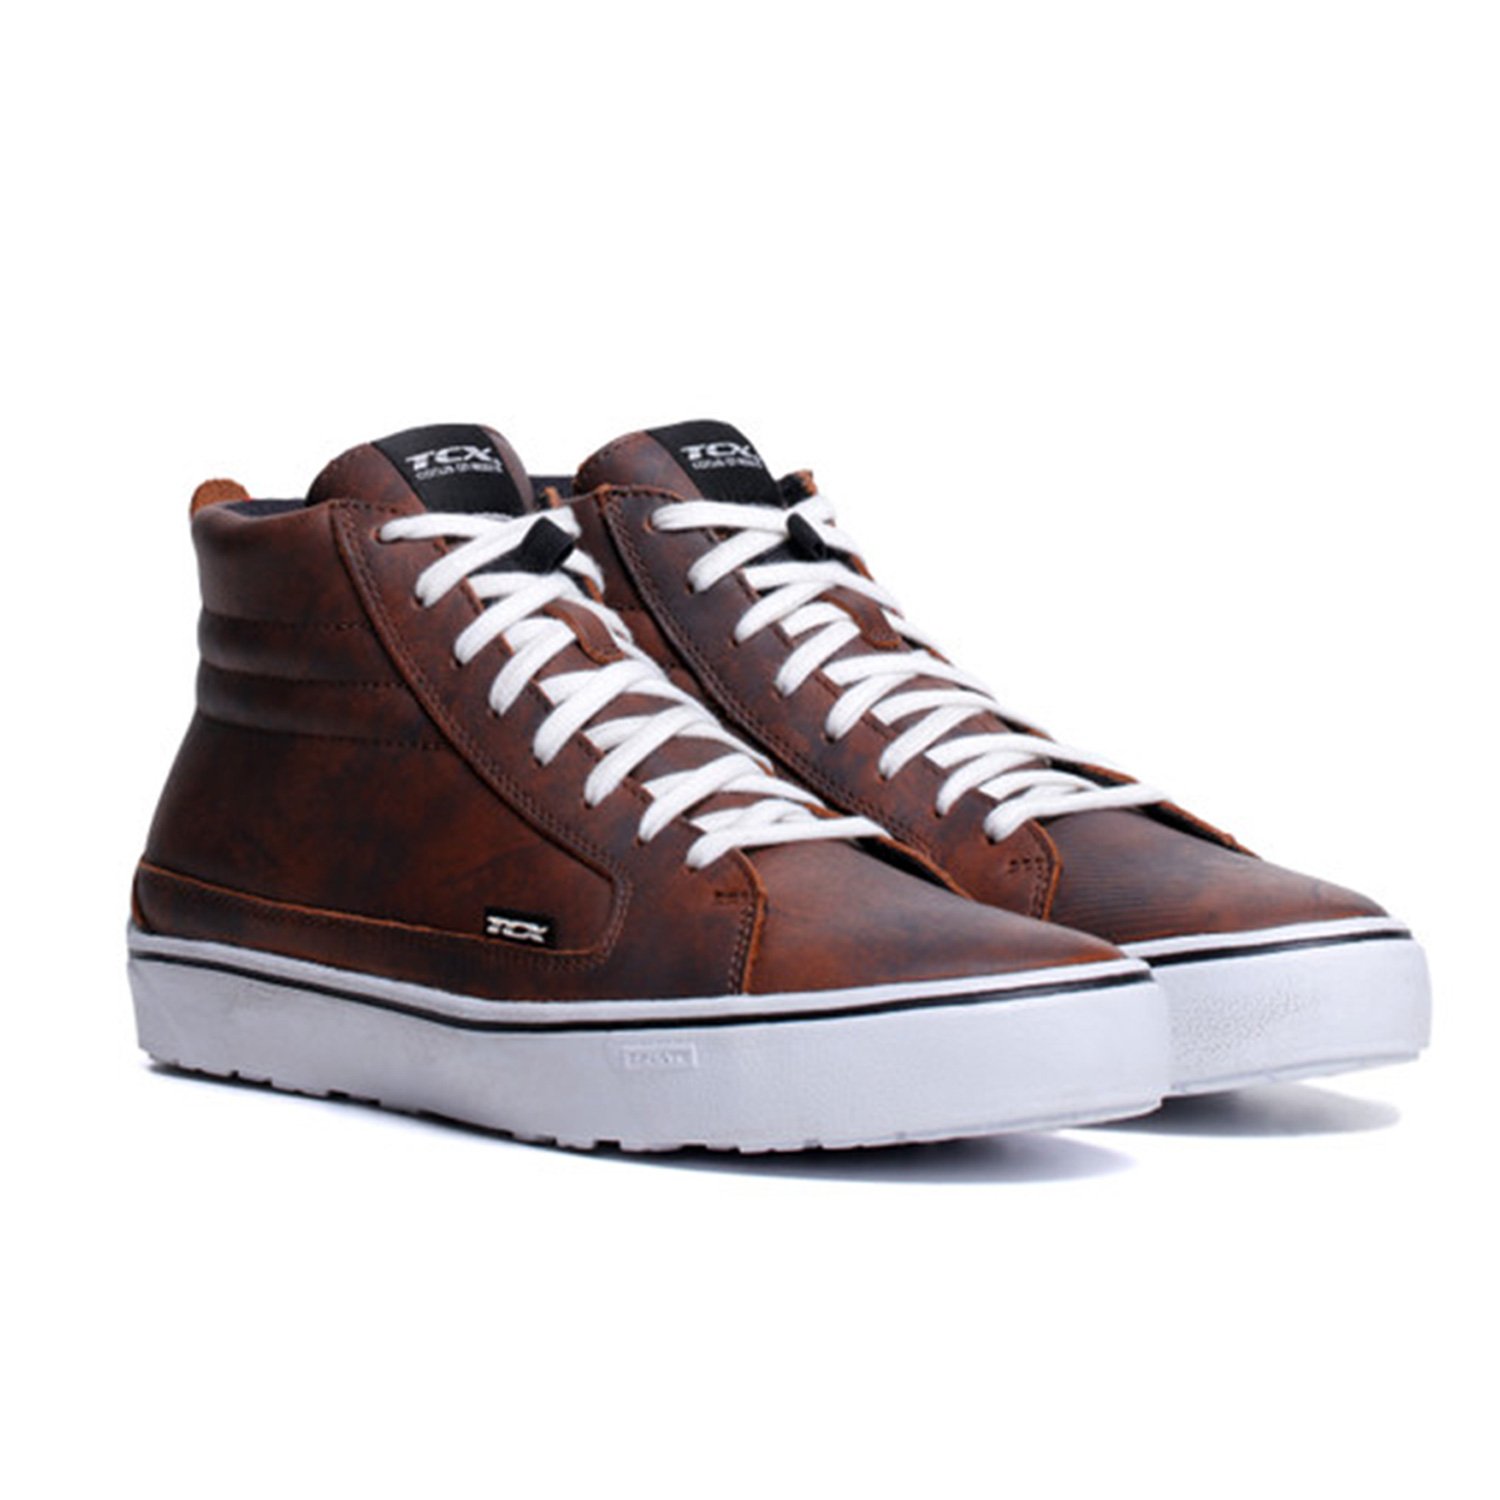 Image of TCX Street 3 WP Brown White Size 40 ID 8051019547835